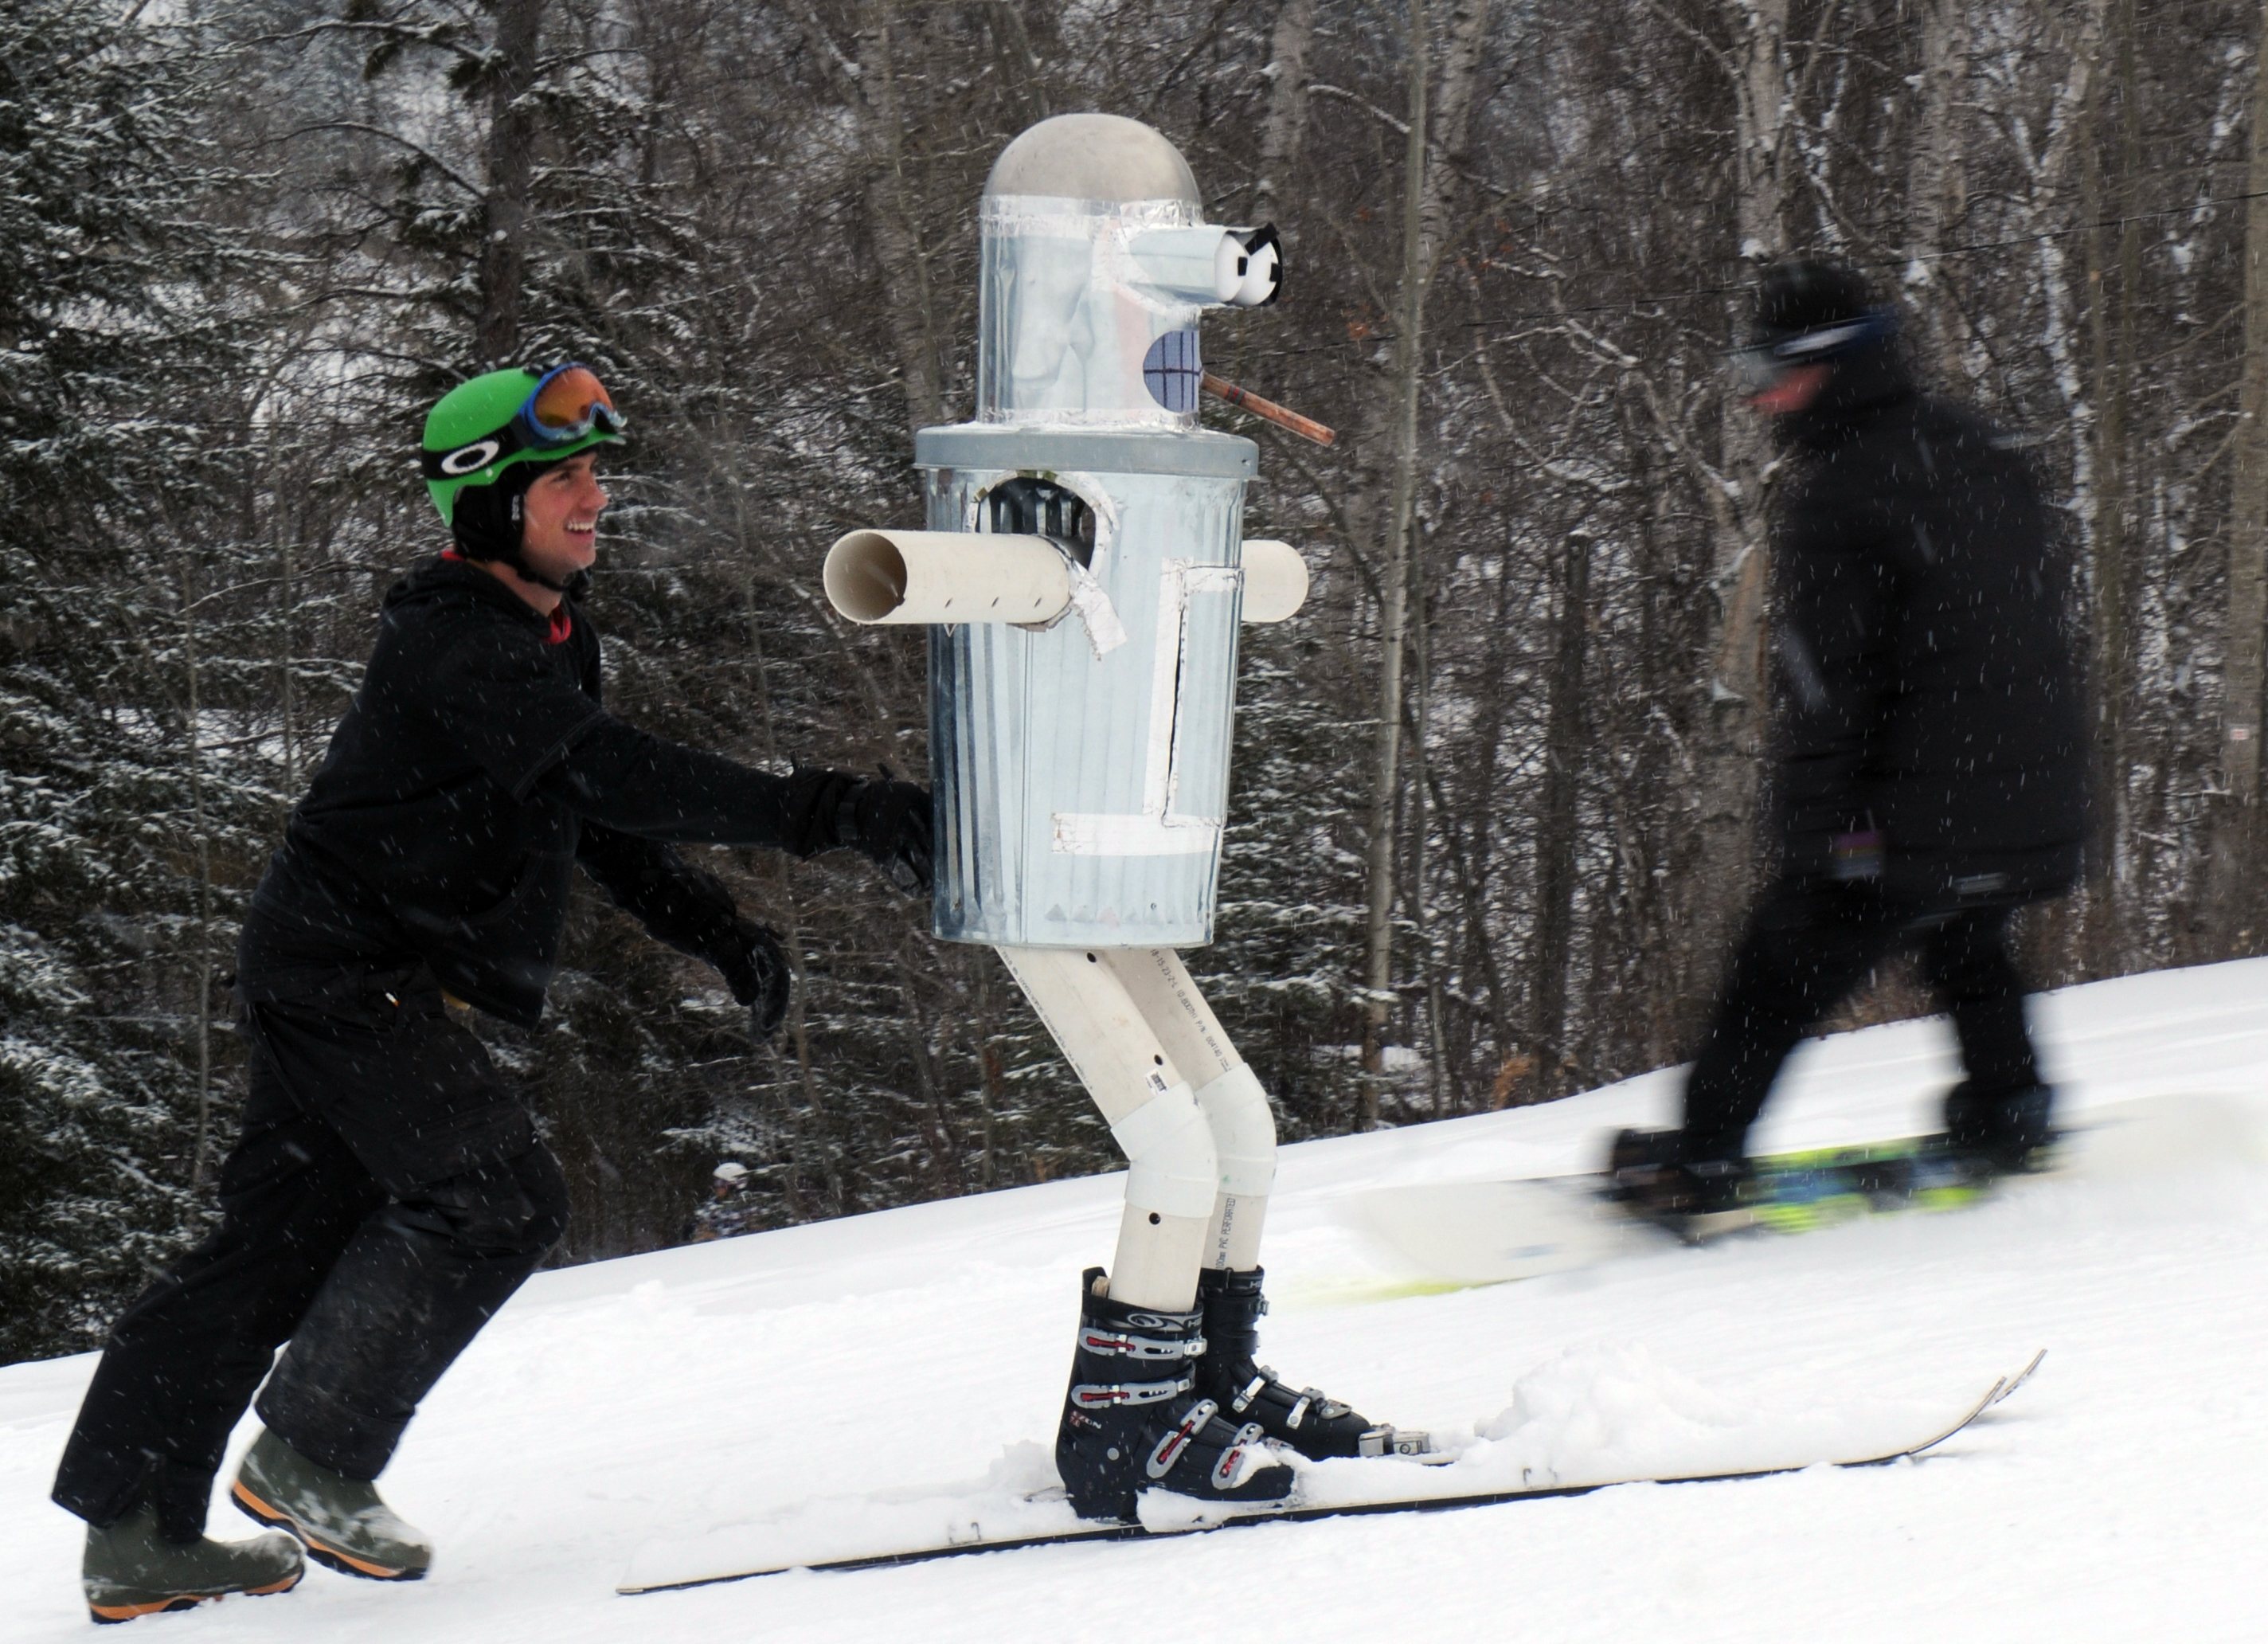 HEADING UP- Peter Martel pushes his entry for the dummy race up the hill during Canyon Ski Resort's Snow Fest this past weekend. Many events such as a scavenger hunt and races were only a few of the attractions this year.